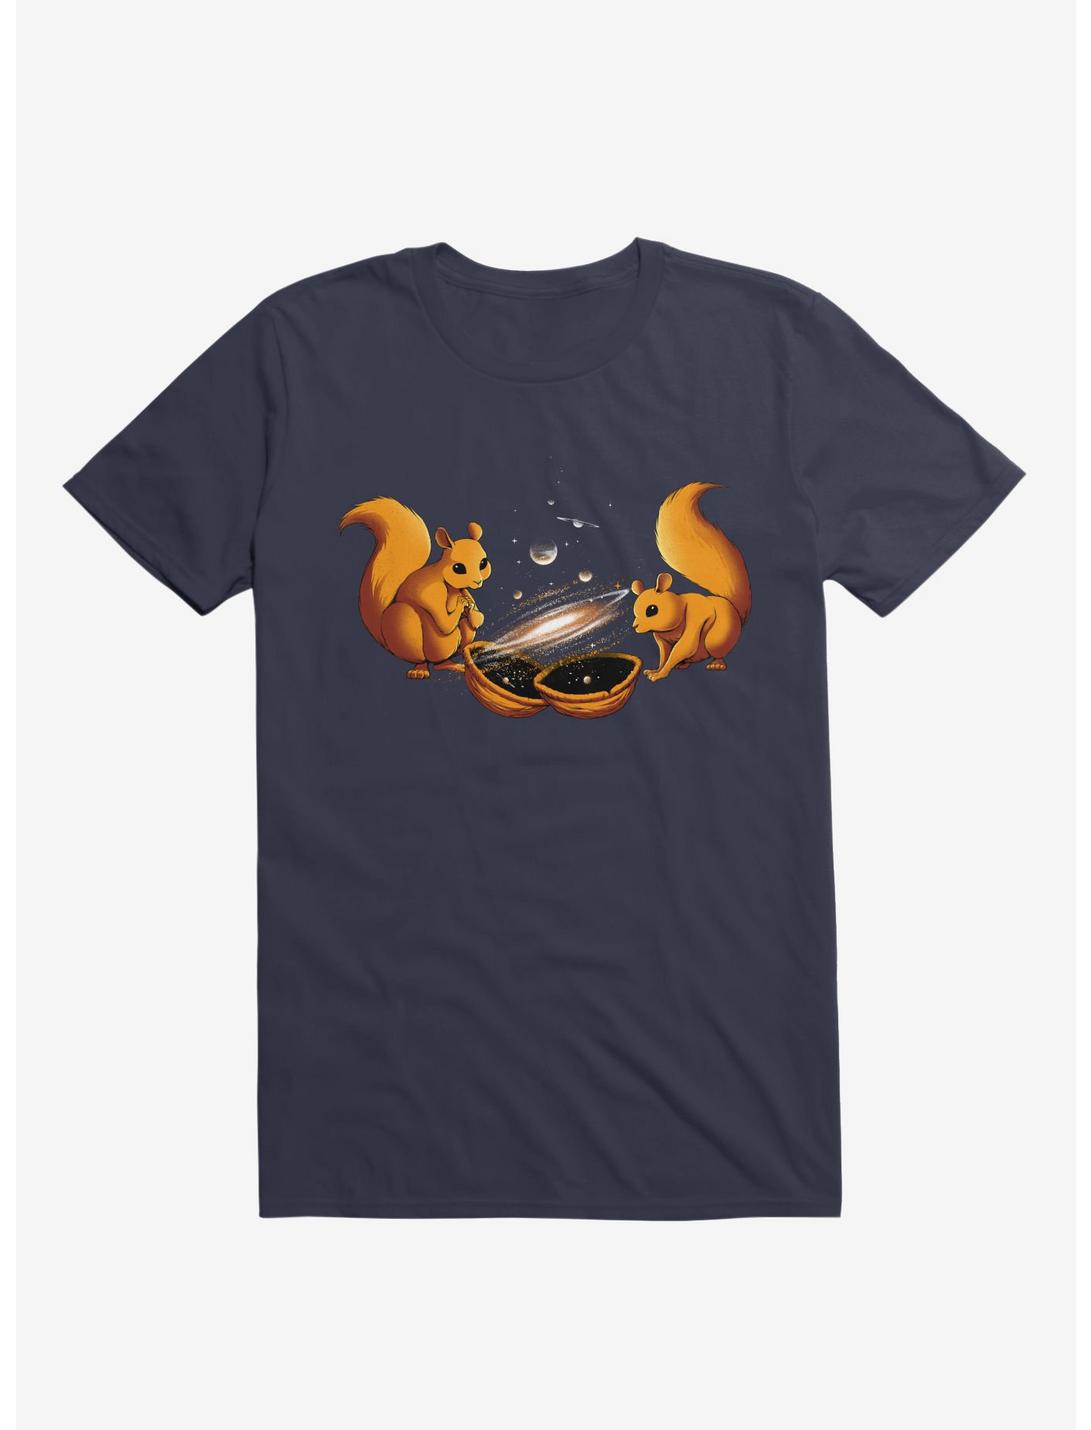 Universe In a Nutshell T-Shirt, NAVY, hi-res